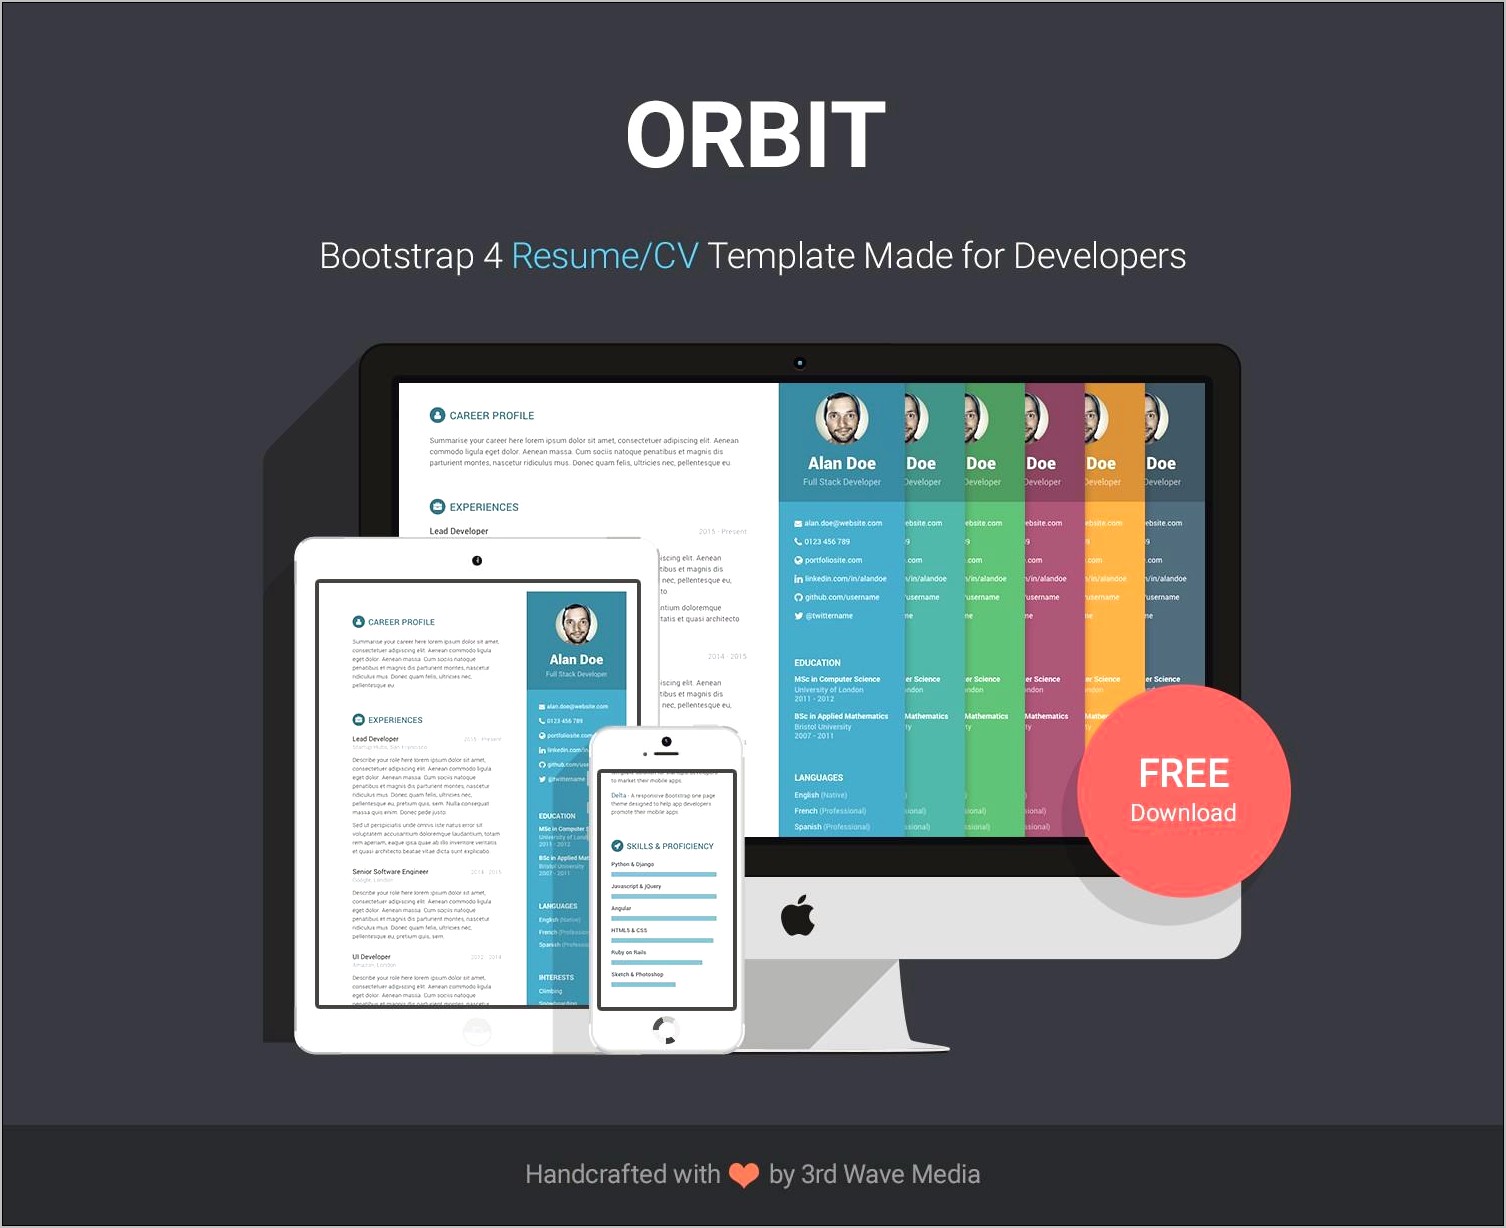 Free Download Bootstrap Templates For Resume